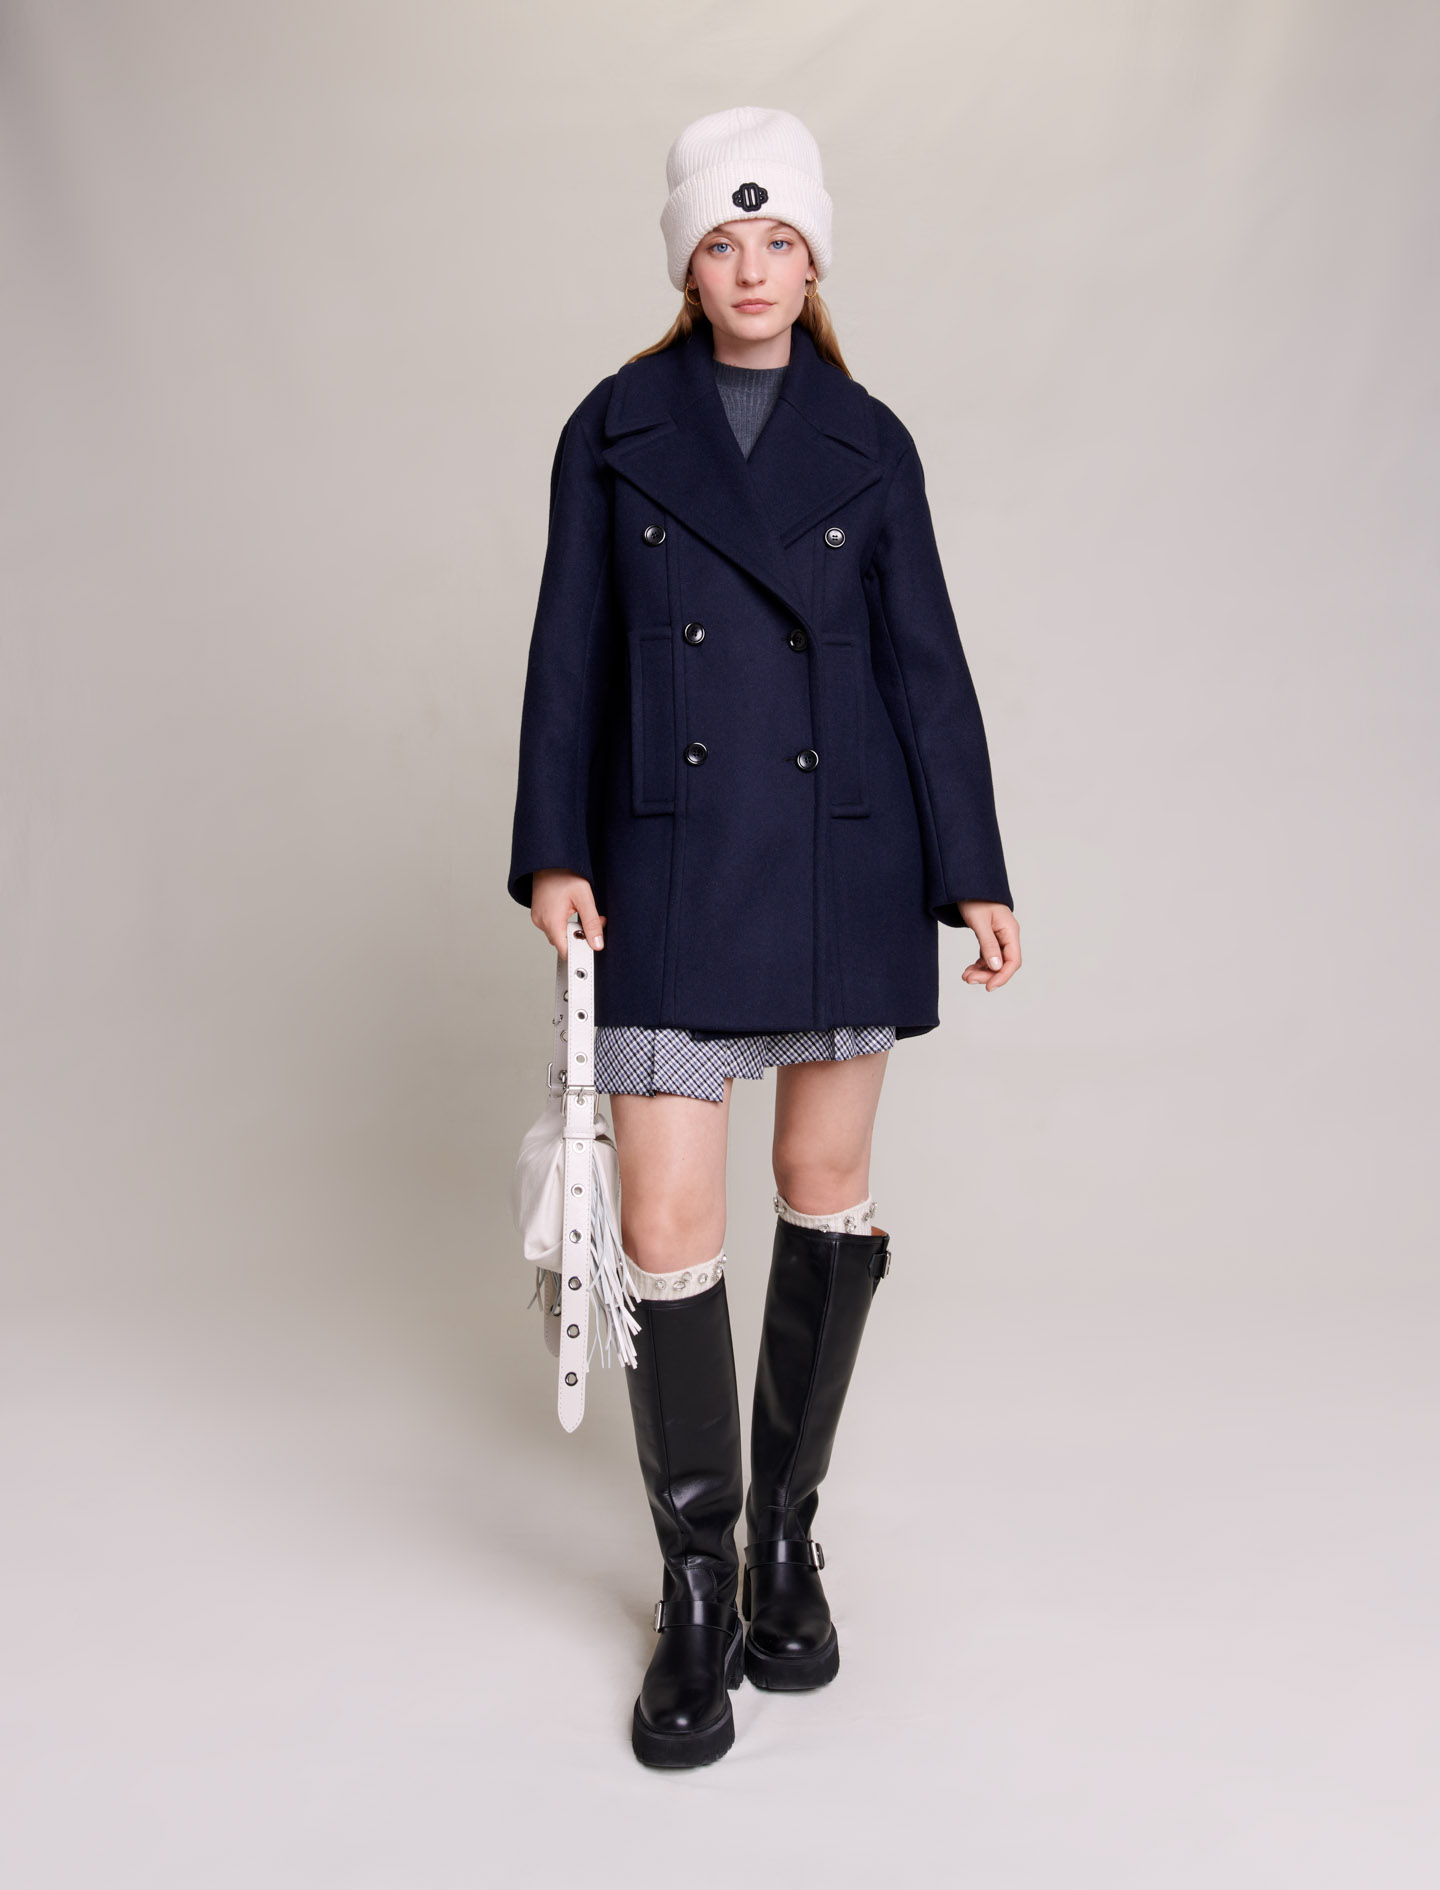 Maje Woman's wool, Pea coat for Fall/Winter, in color Navy / Blue